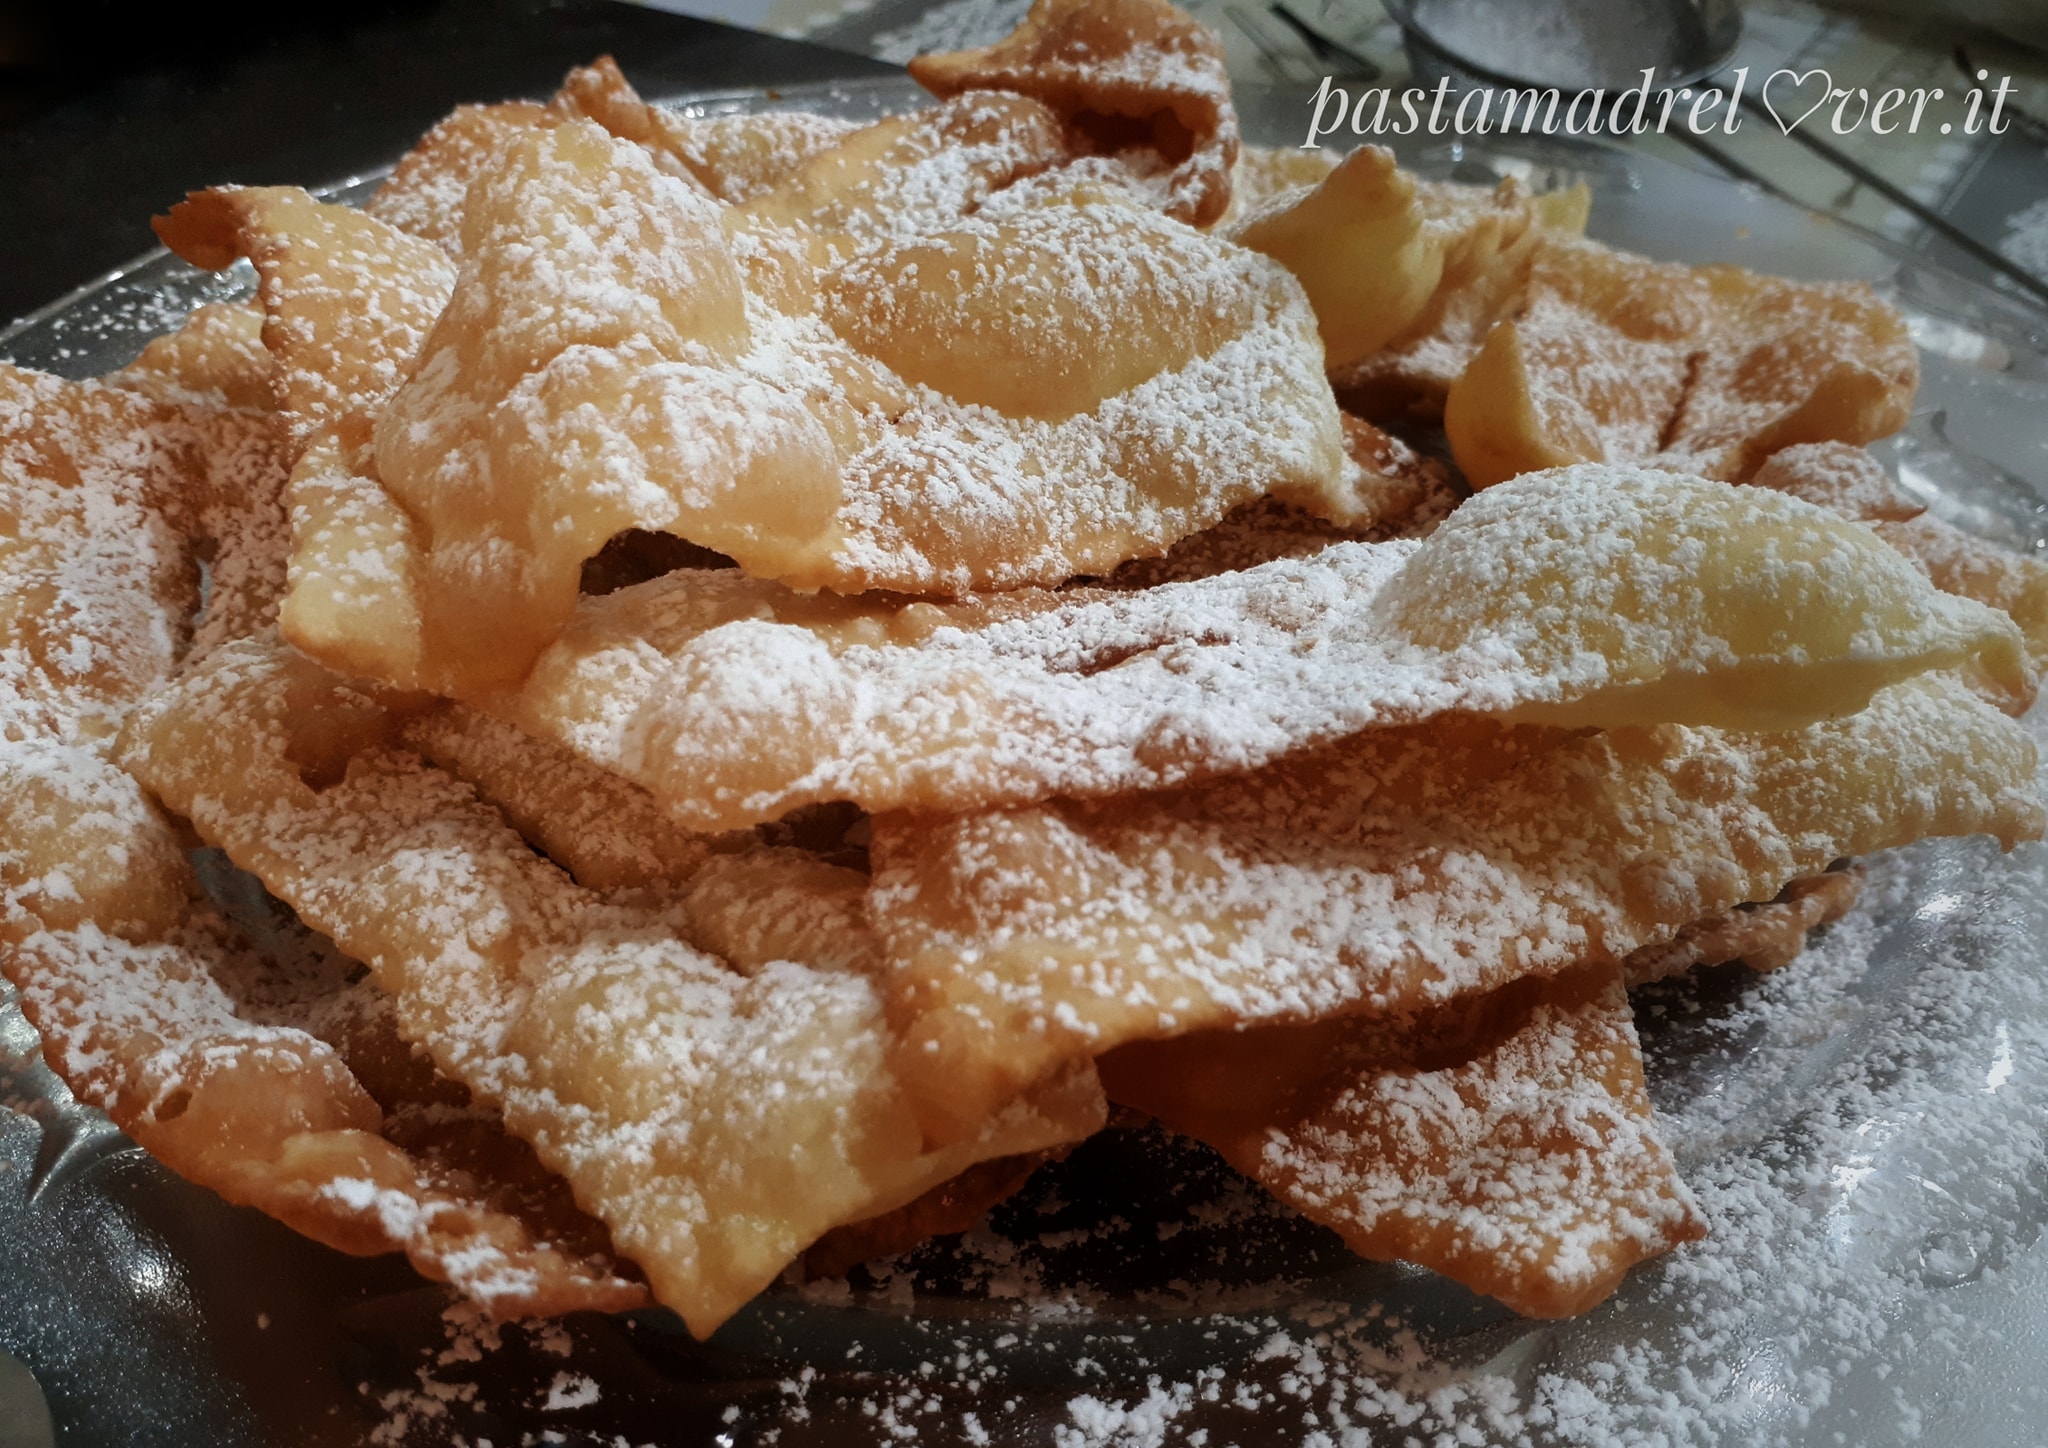 Thumbnail for Chiacchiere di Carnevale, frappe, cenci, bugie o frittole